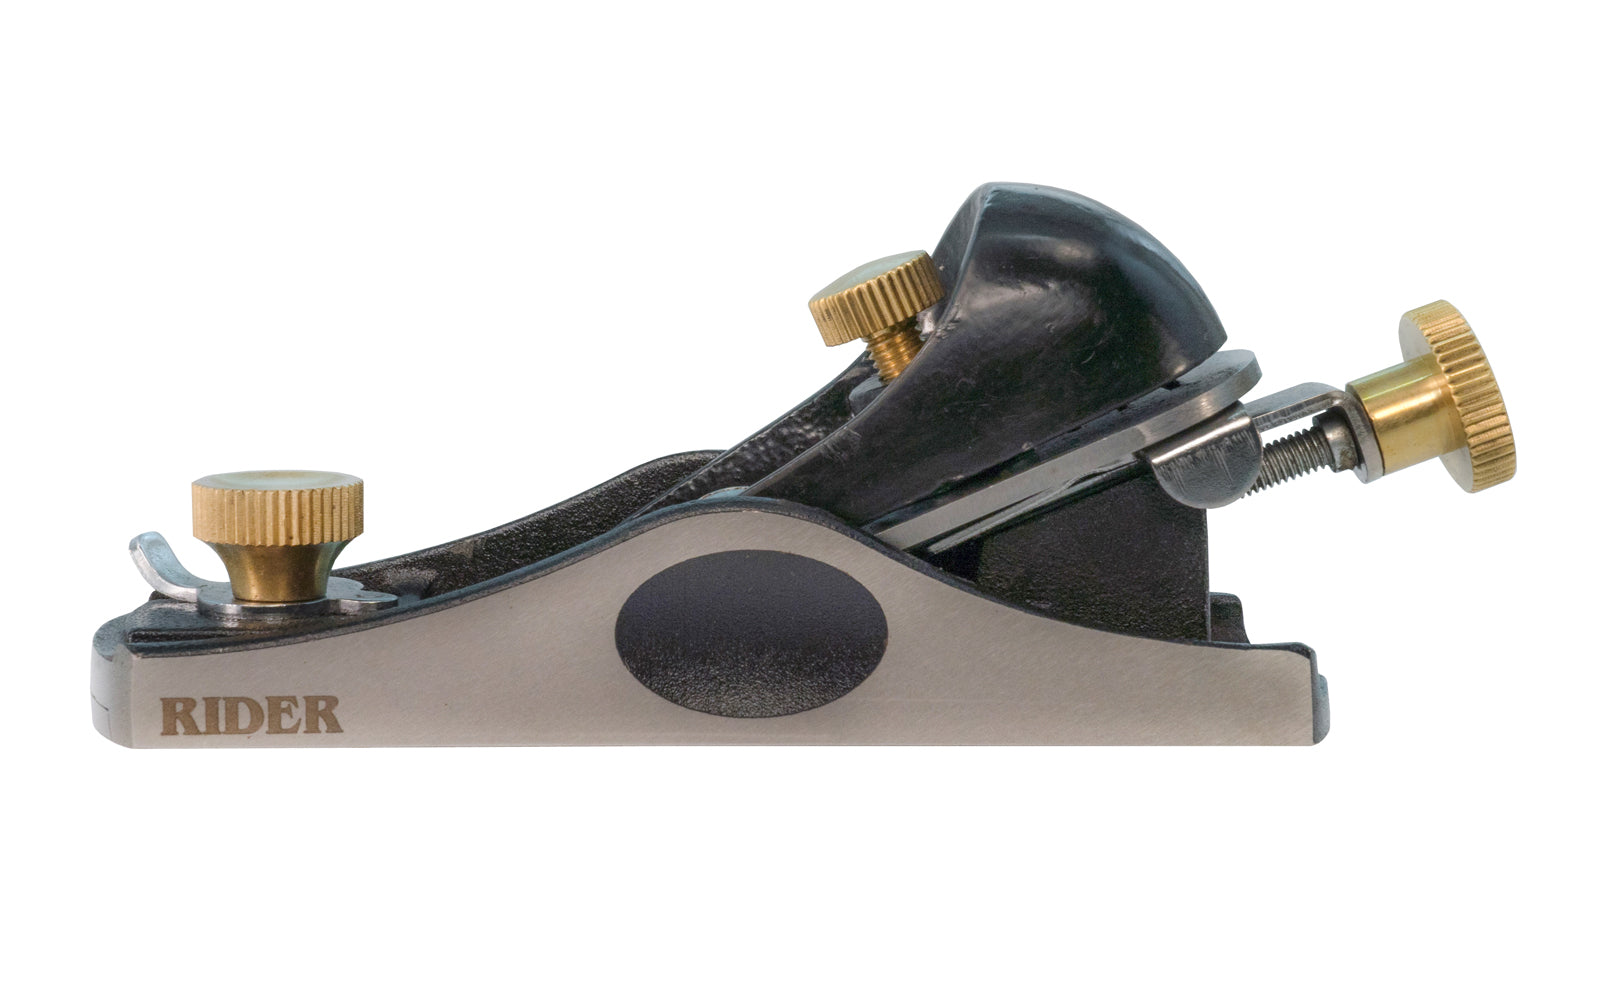 This Block Plane - No. 9-1/2 is good for general shaving. Mouth of the plane is adjustable for fine or coarse work. Cutter blade rests at a 21° angle, & provides more control, less vibration, & smooth finish. Thickness & evenness of the shavings can be changed by simply adjusting the cutter blade. Made by Rider / Soba